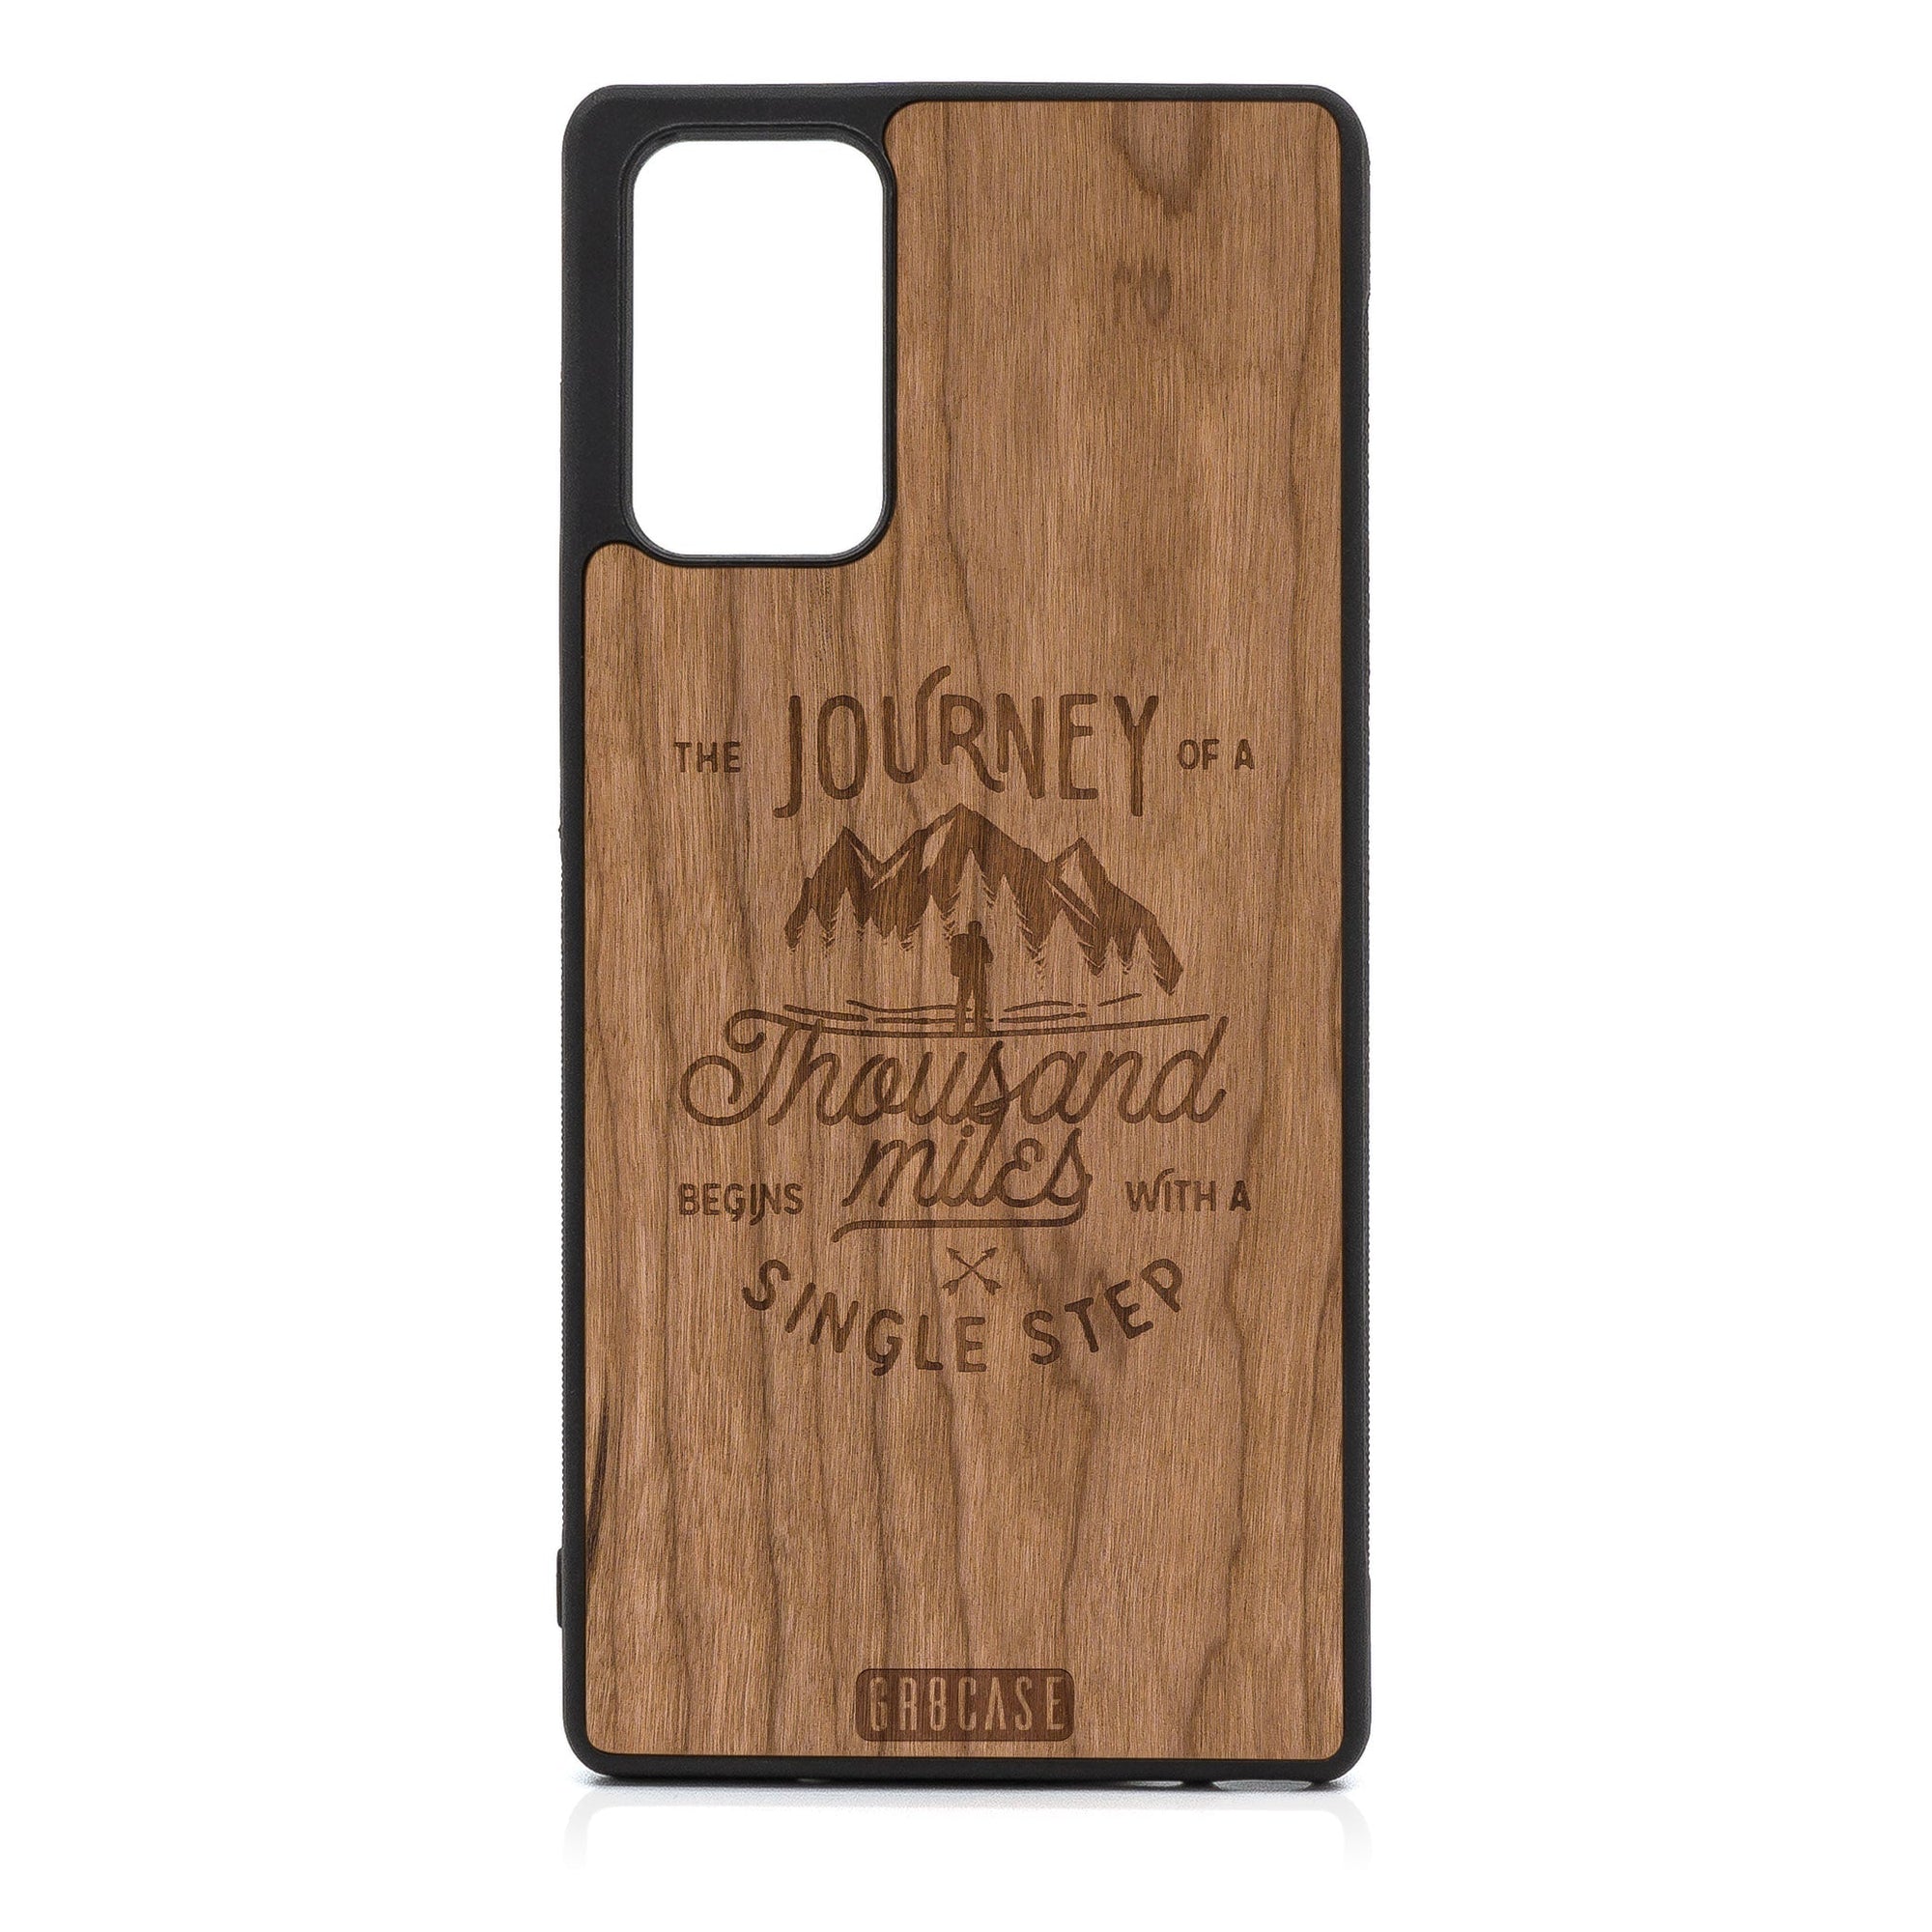 The Journey Of A Thousand Miles Begins With A Single Step Design Wood Case For Samsung Galaxy A71 5G